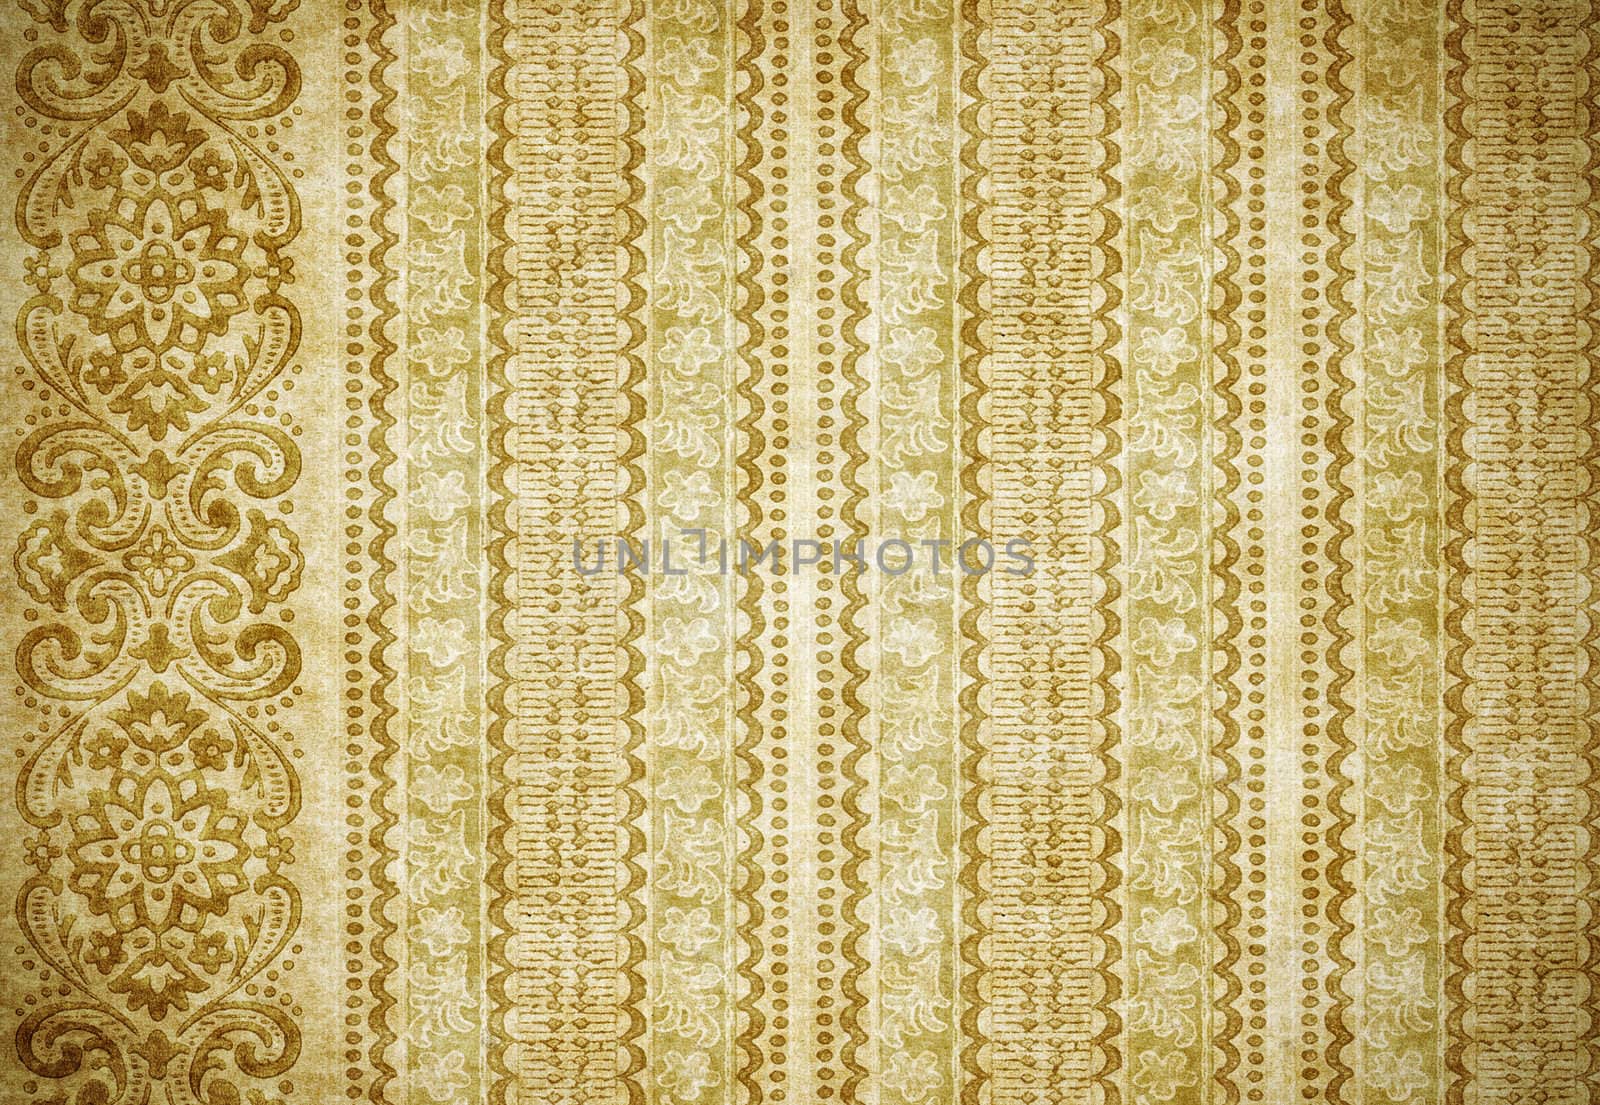 old wallpaper by clearviewstock